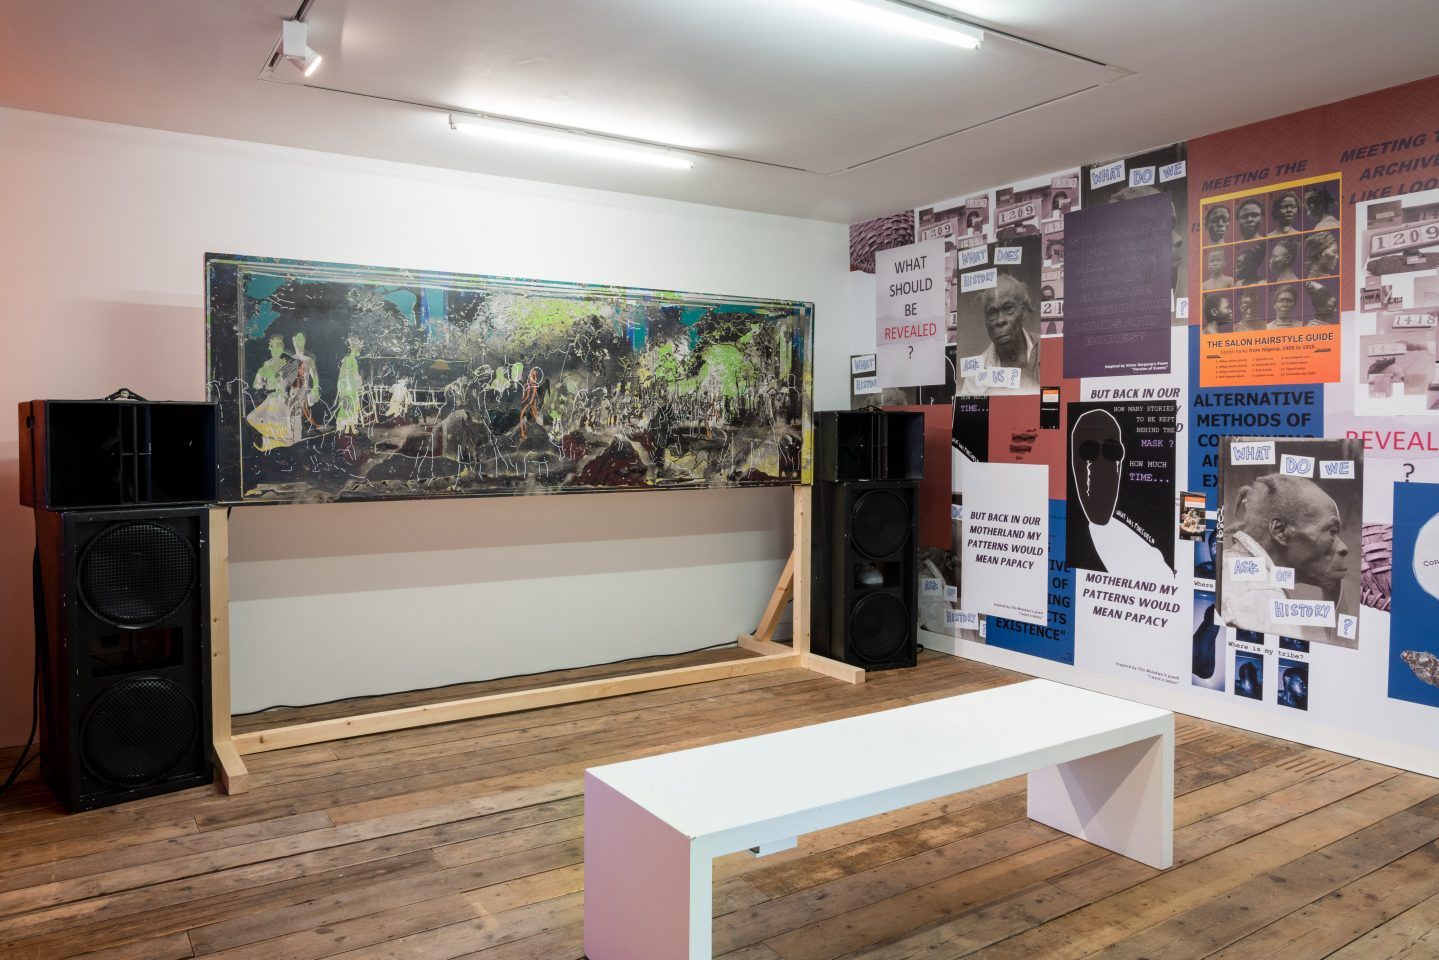 A series of posters on the right hand wall, a collage painting on a wooden frame and two huge speakers on either side. A white bench is also seen positioned facing the wooden frame.